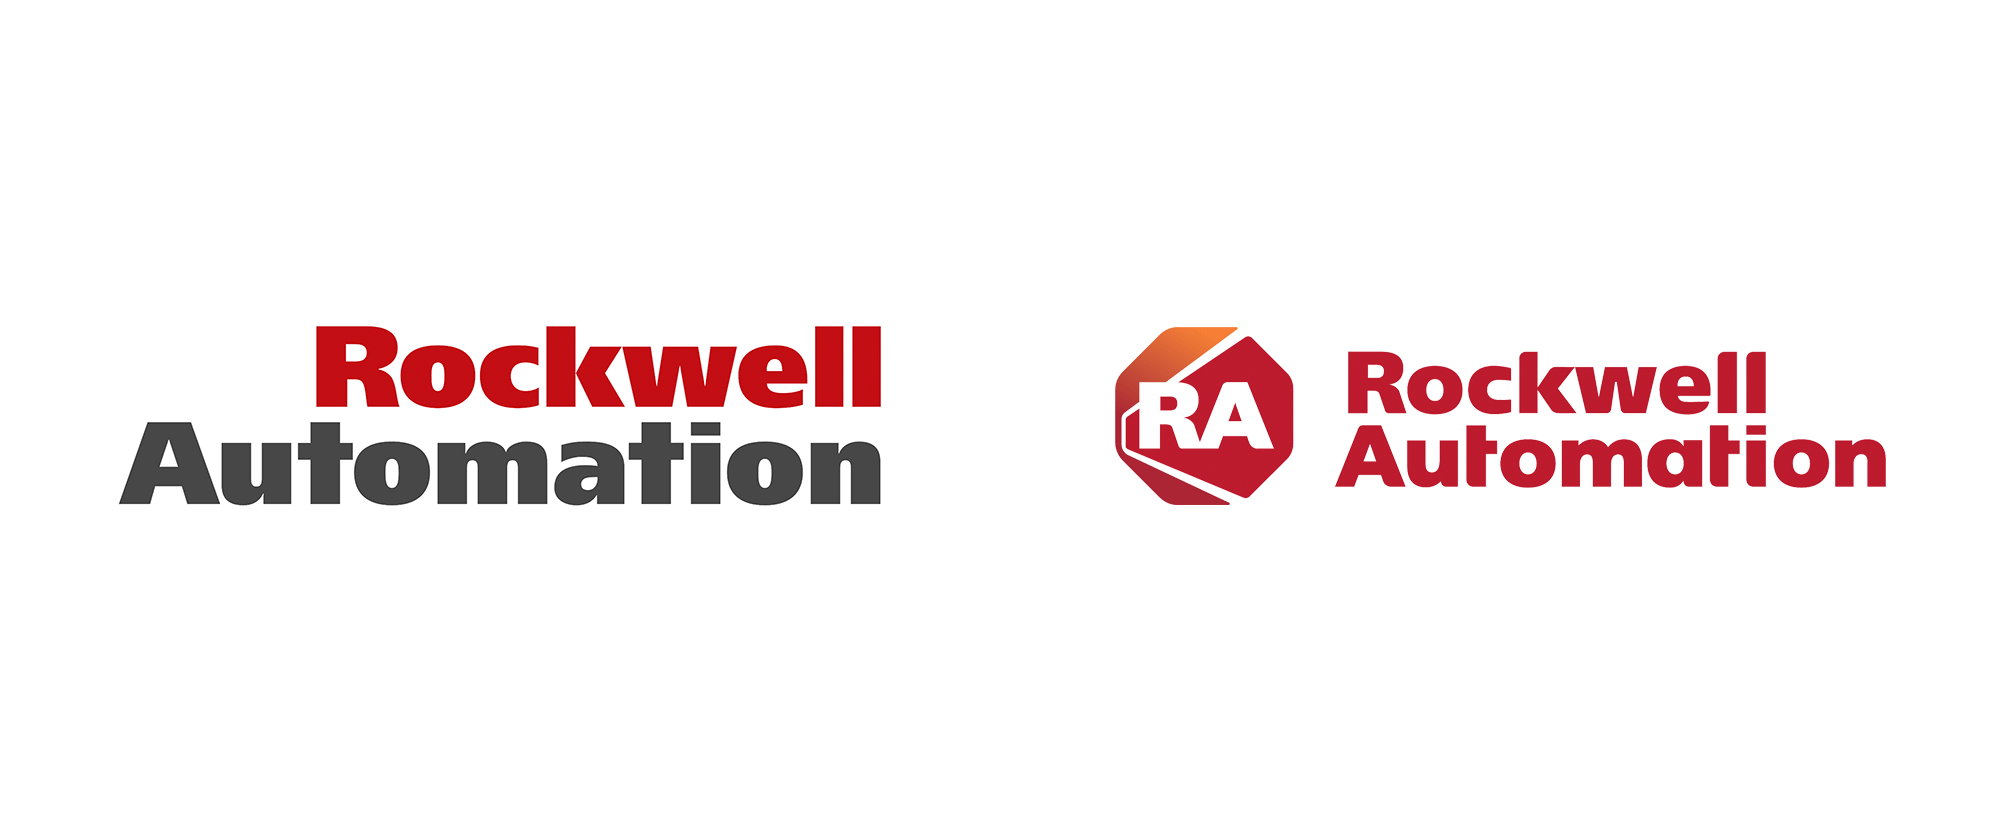 Automation Logo - Brand New: New Logo for Rockwell Automation